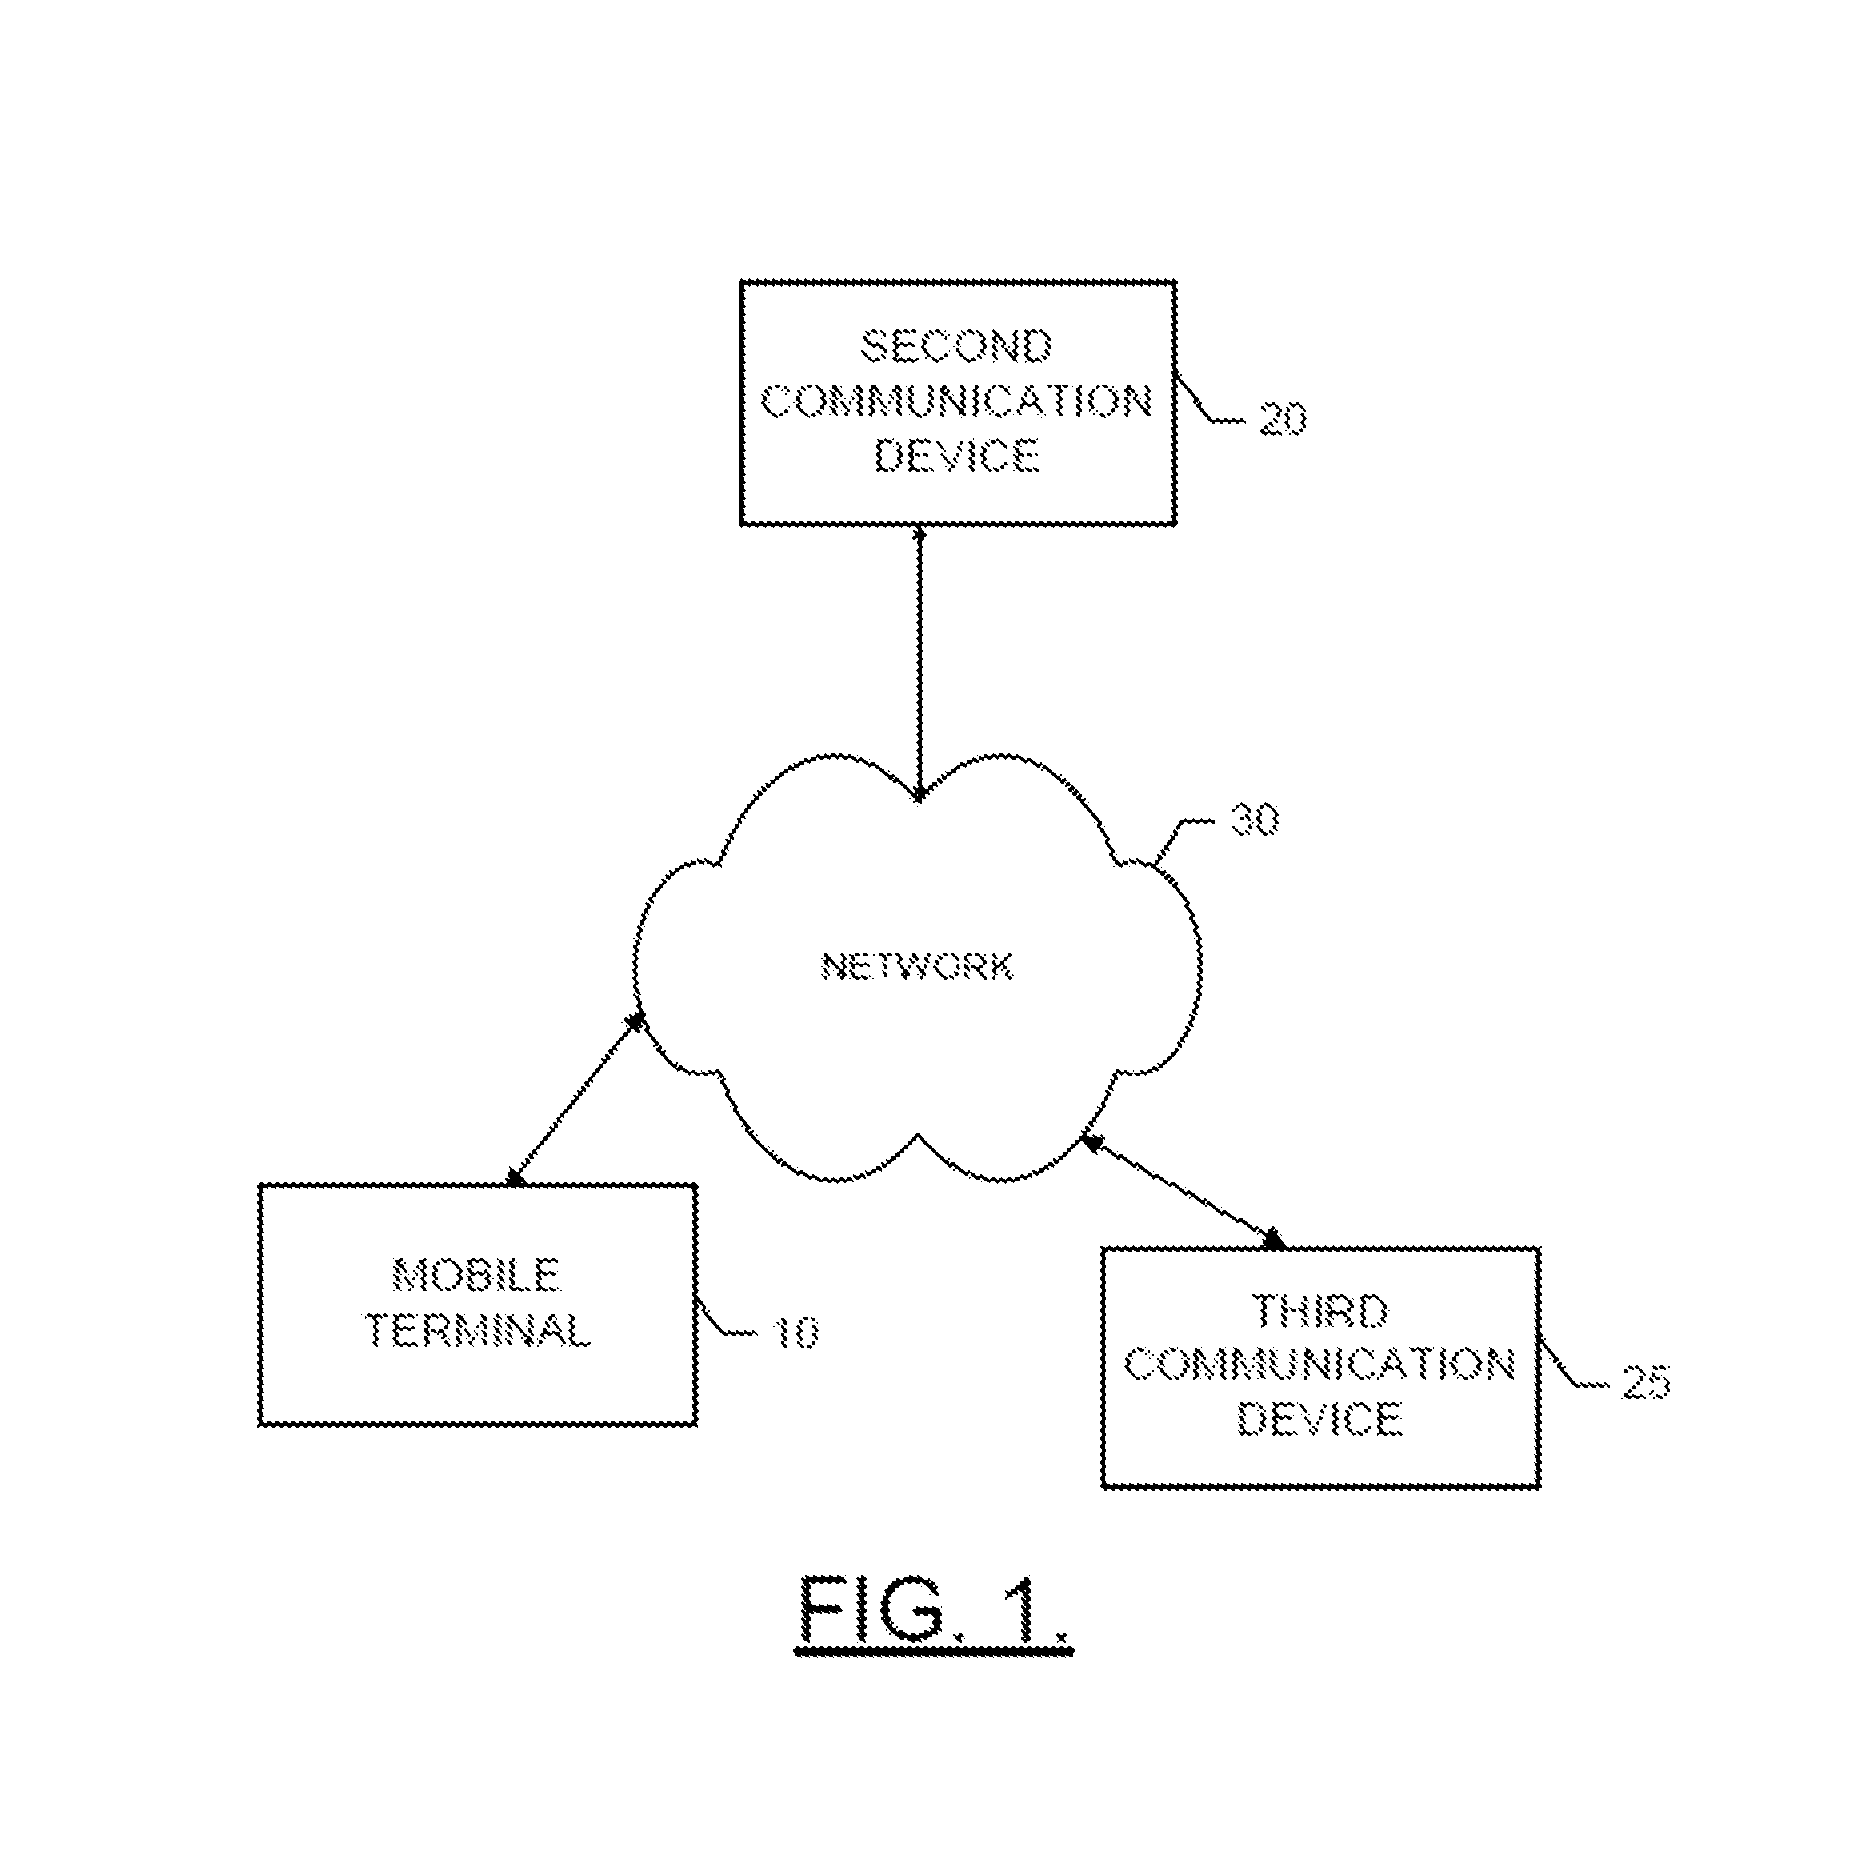 Methods, apparatuses and computer program products for efficiently recognizing faces of images associated with various illumination conditions